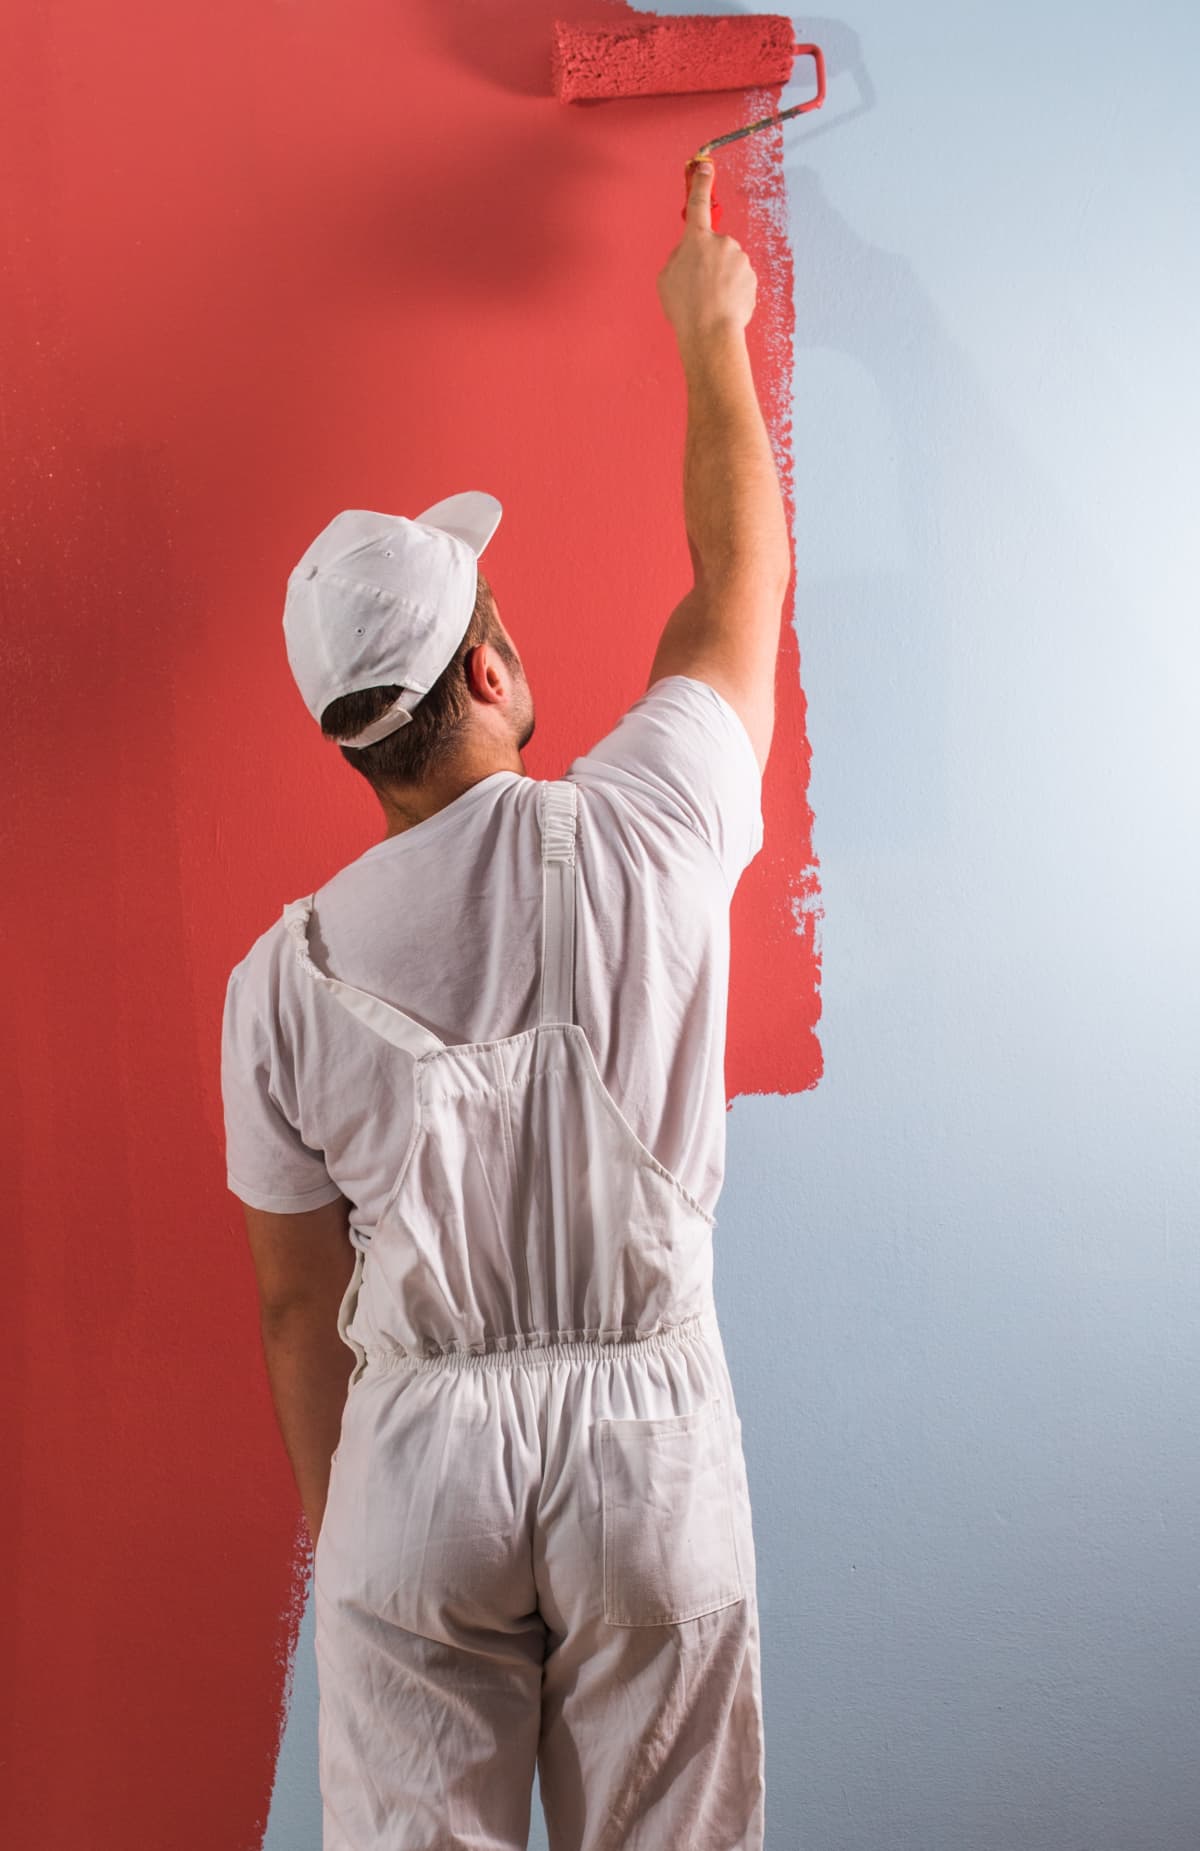 A person painting the wall with roller